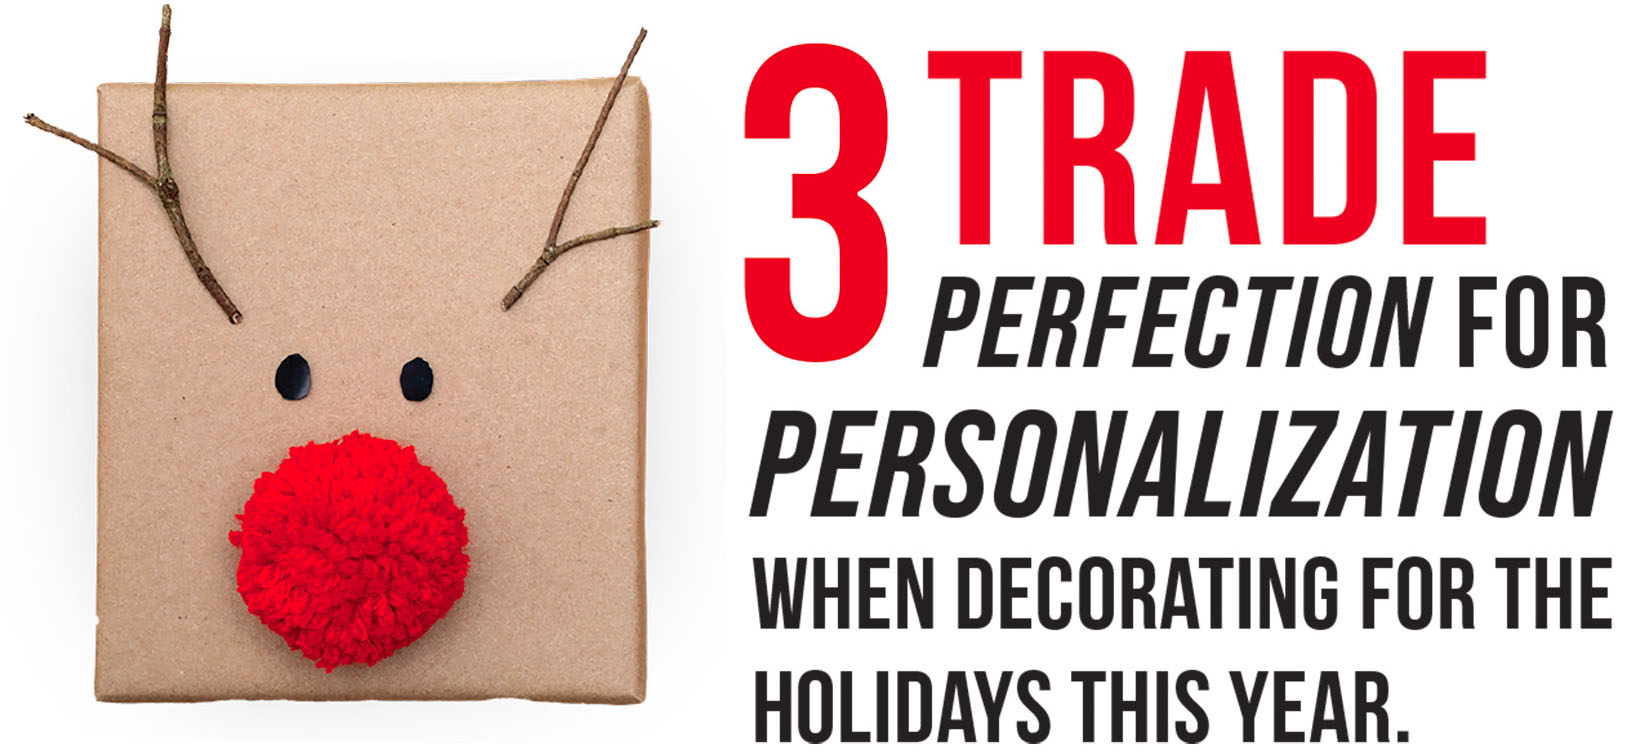 Red numeral 3 with text after that reads Perfection for personalization when decorating for the holidays this year and a small brown rectangular cardboard box with items glued onto box resembling a reindeer